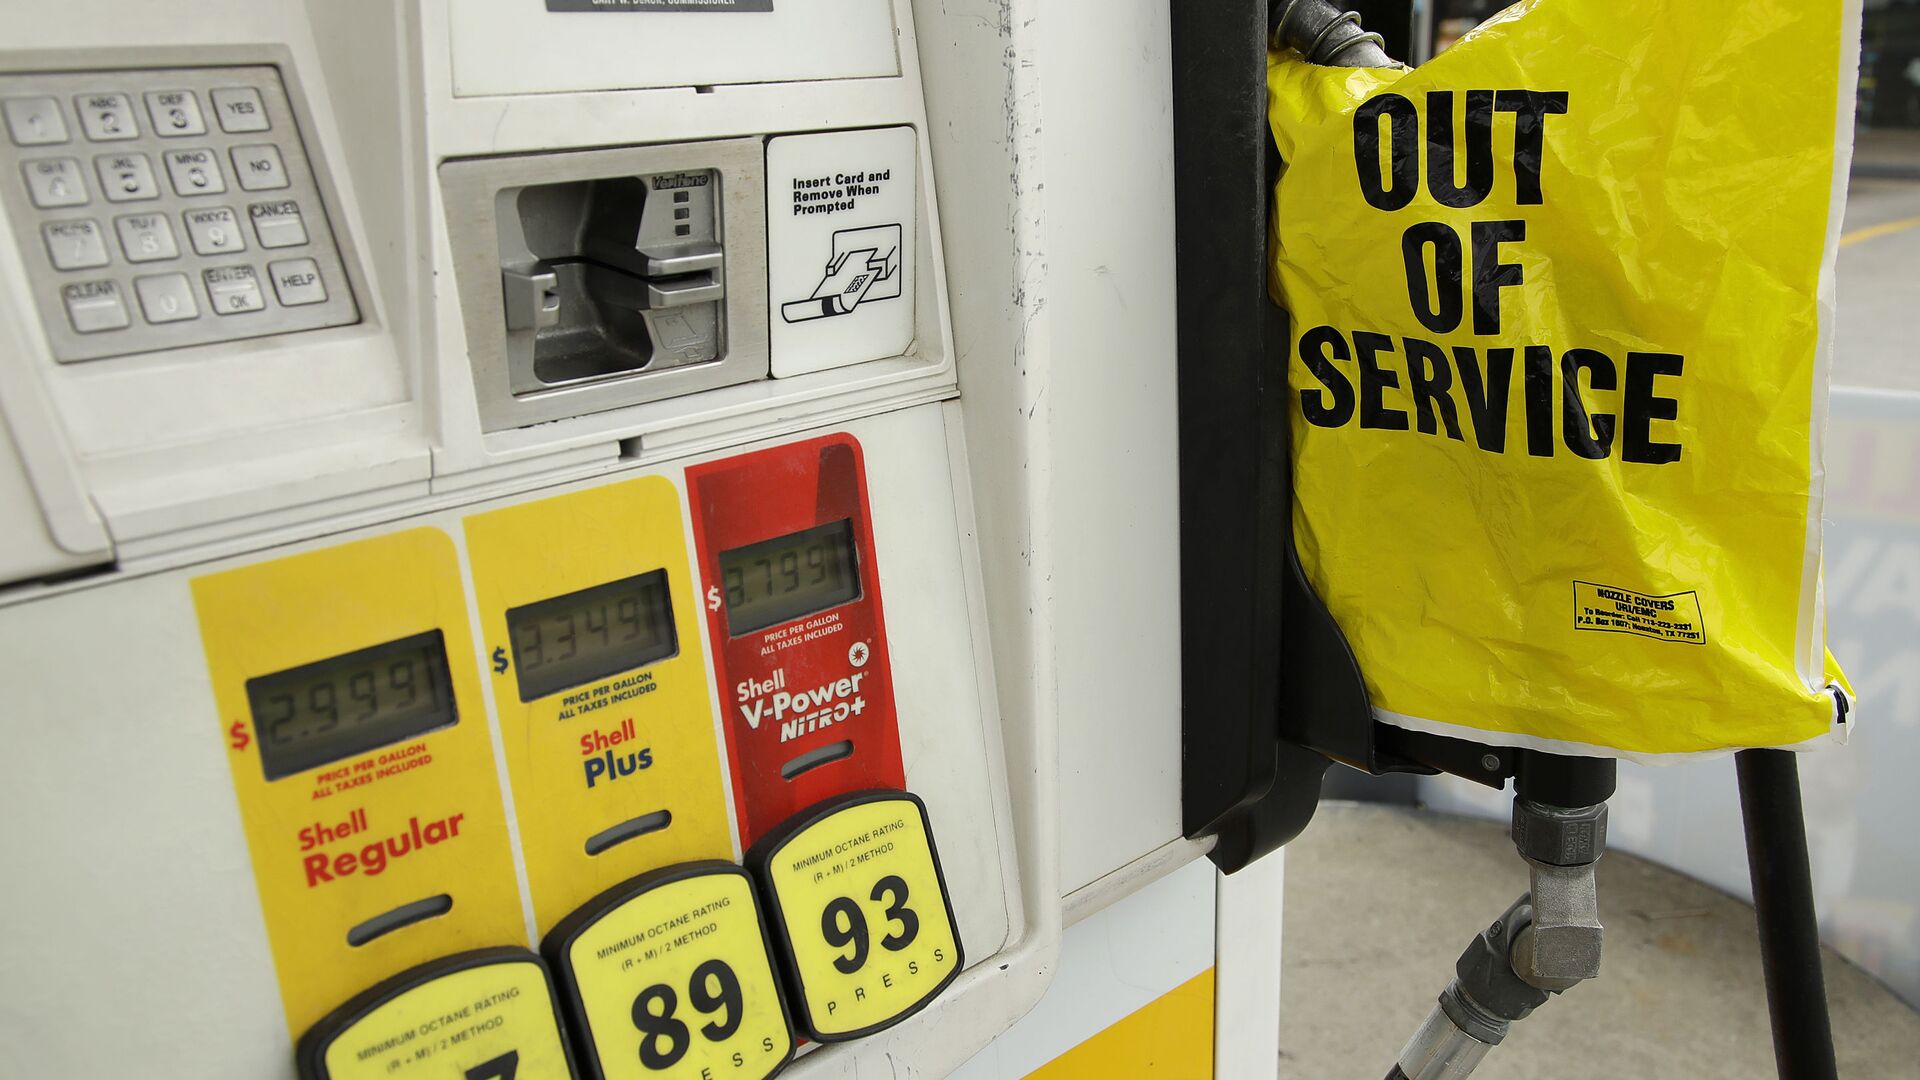 A gasoline station that ran out of gas for sale displays an out of service sign on the pump on Tuesday, May 11, 2021, in Atlanta. Gasoline futures are ticking higher following a cyberextortion attempt on the Colonial Pipeline, a vital U.S. pipeline that carries fuel from the Gulf Coast to the Northeast. - Sputnik International, 1920, 25.05.2021